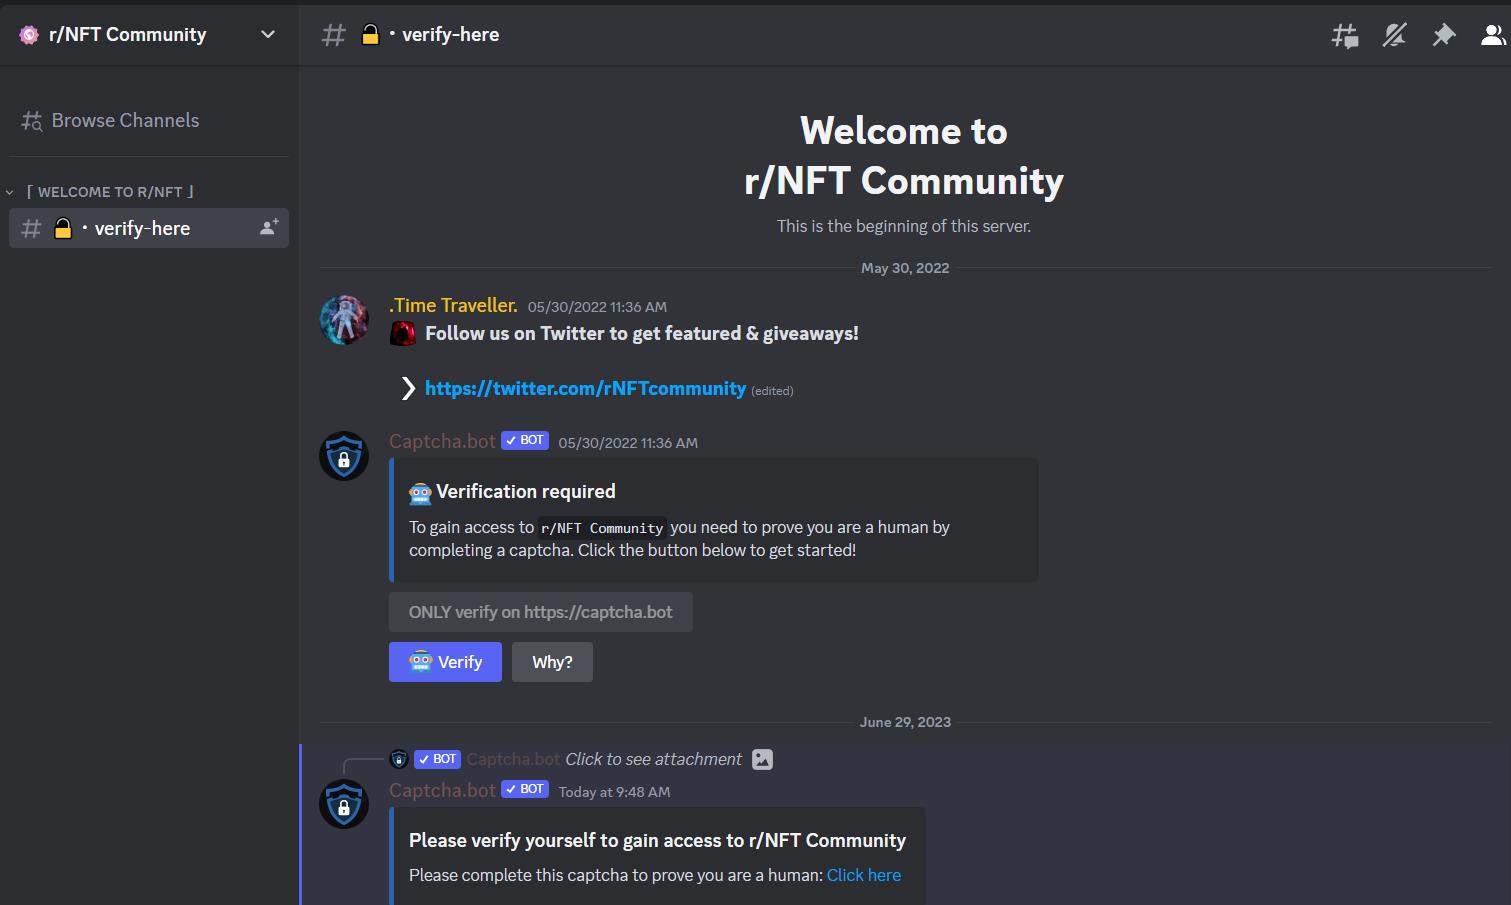 NFT Discord Servers & Groups: List of the Best 10 NFT Discord Communities to Join